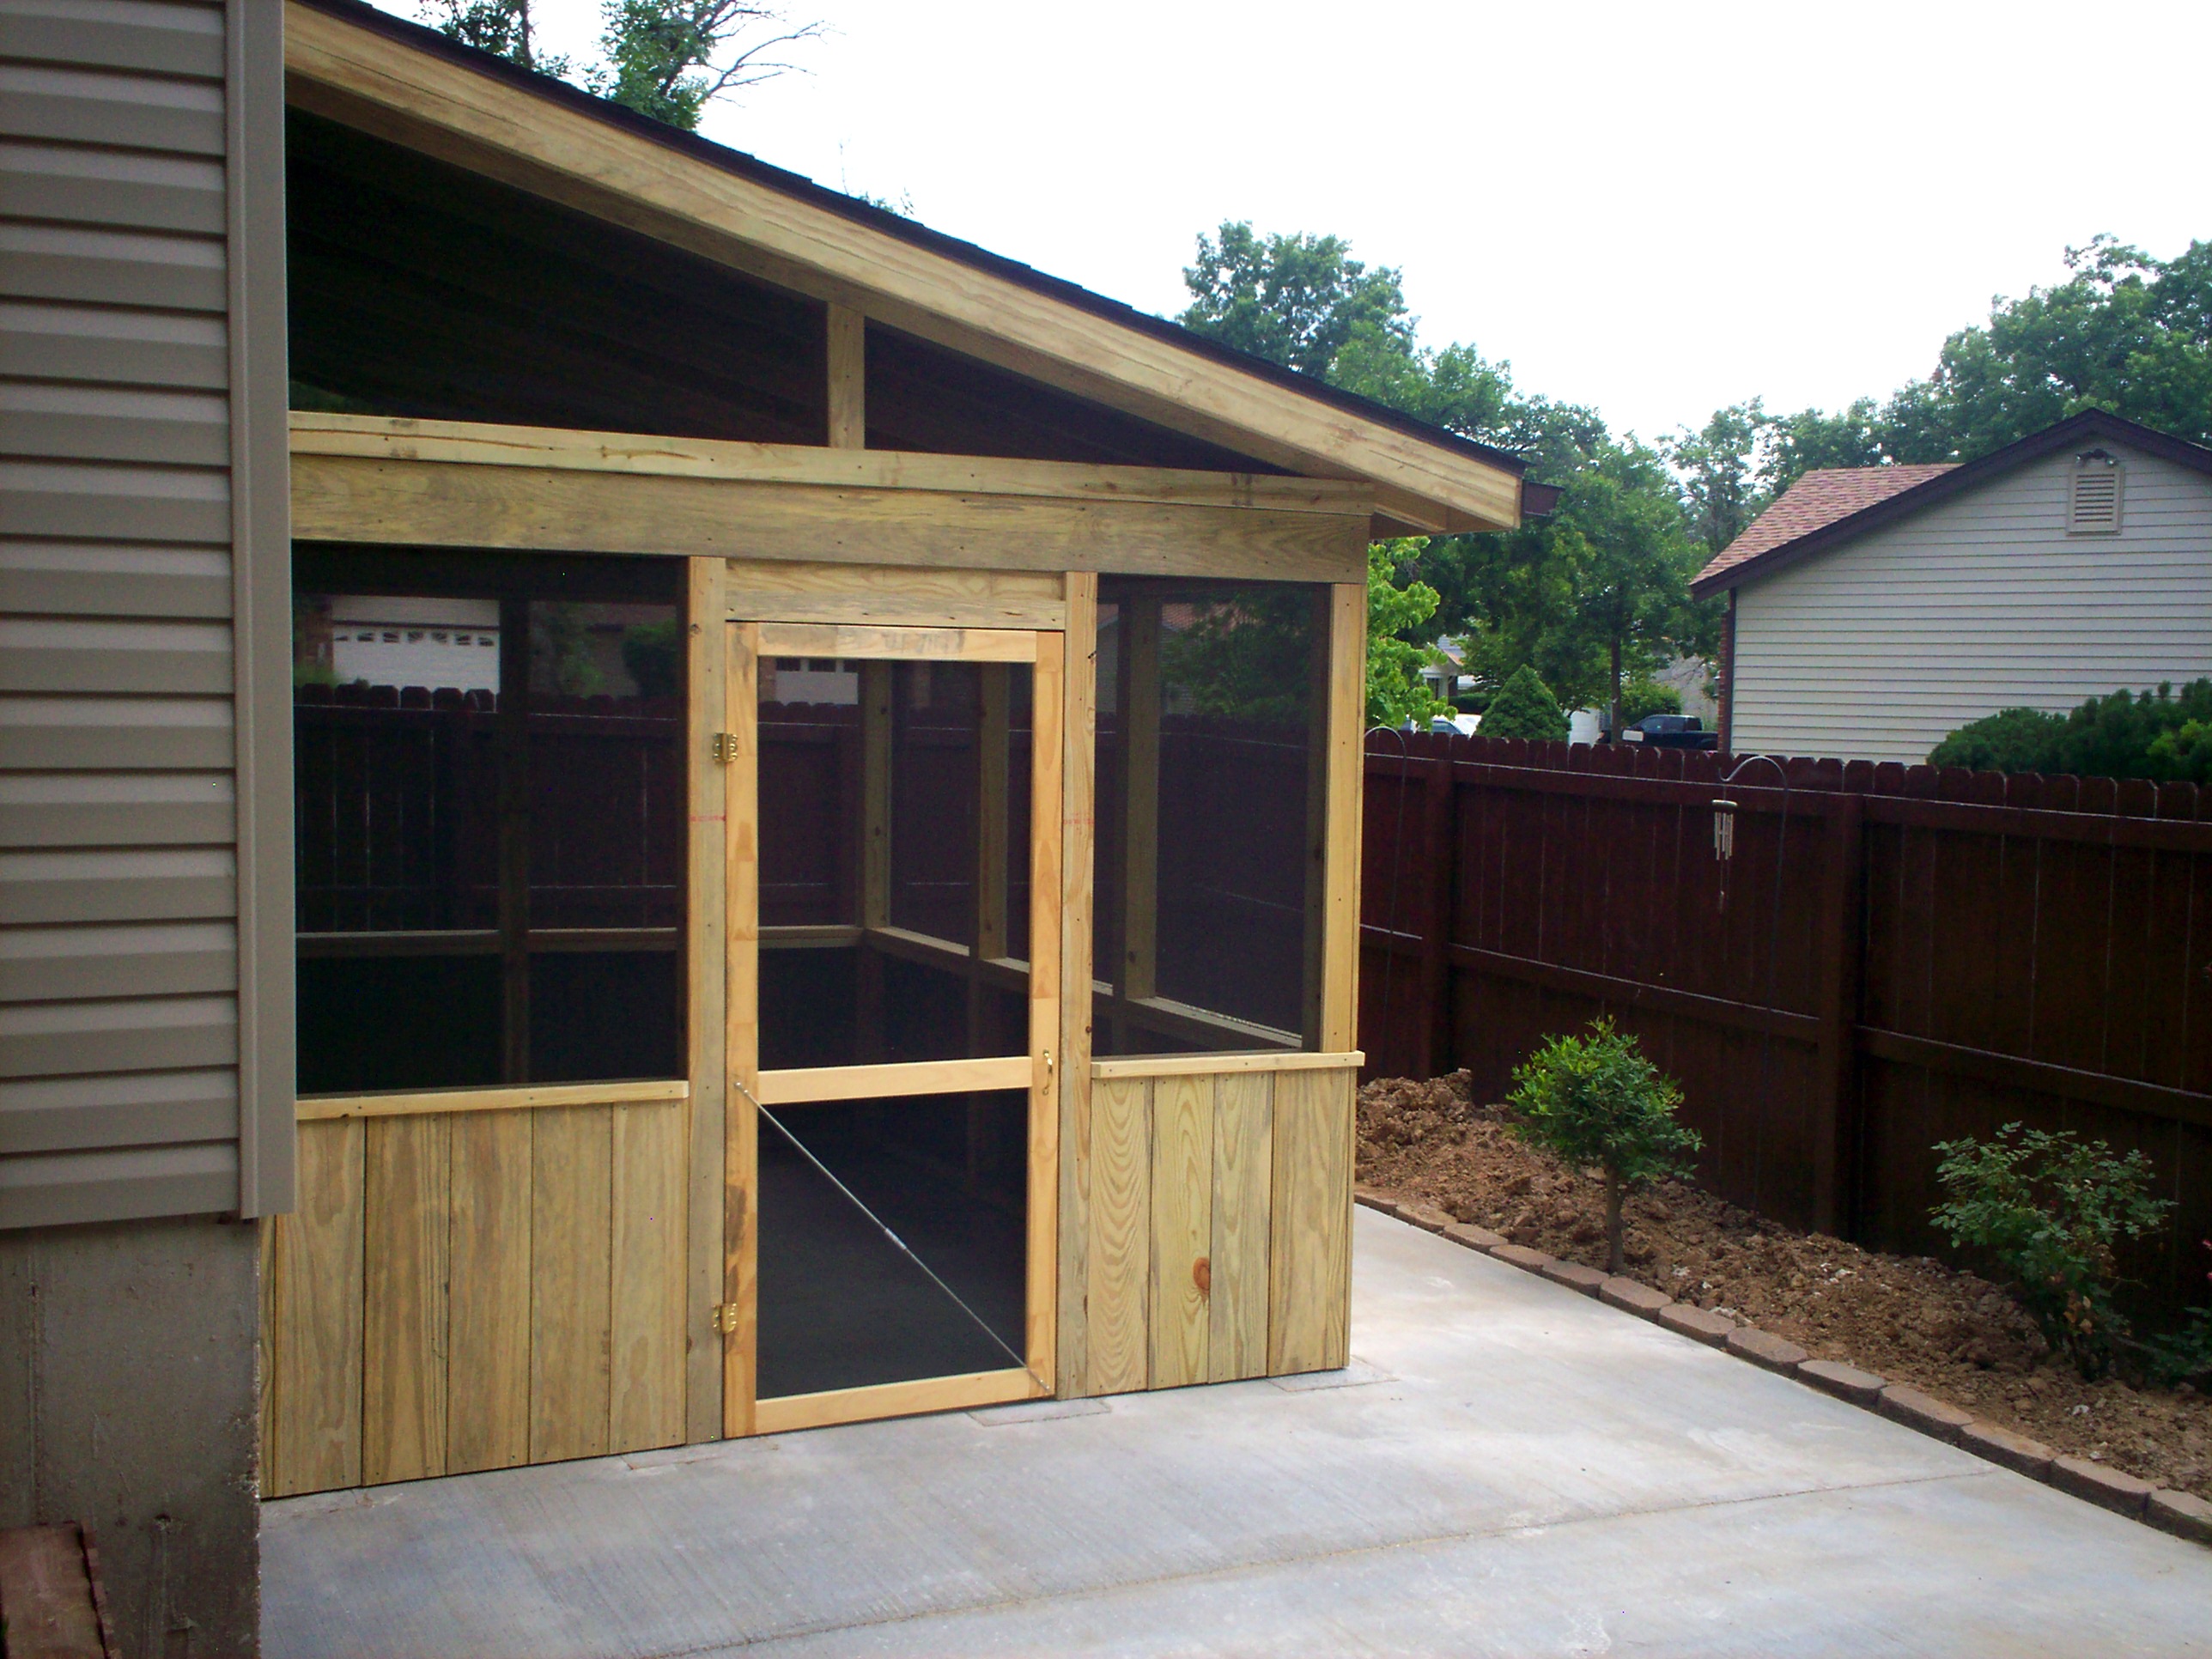  Wood Screened Porch on Patio with Shed Roof by Archadeck, St. Louis